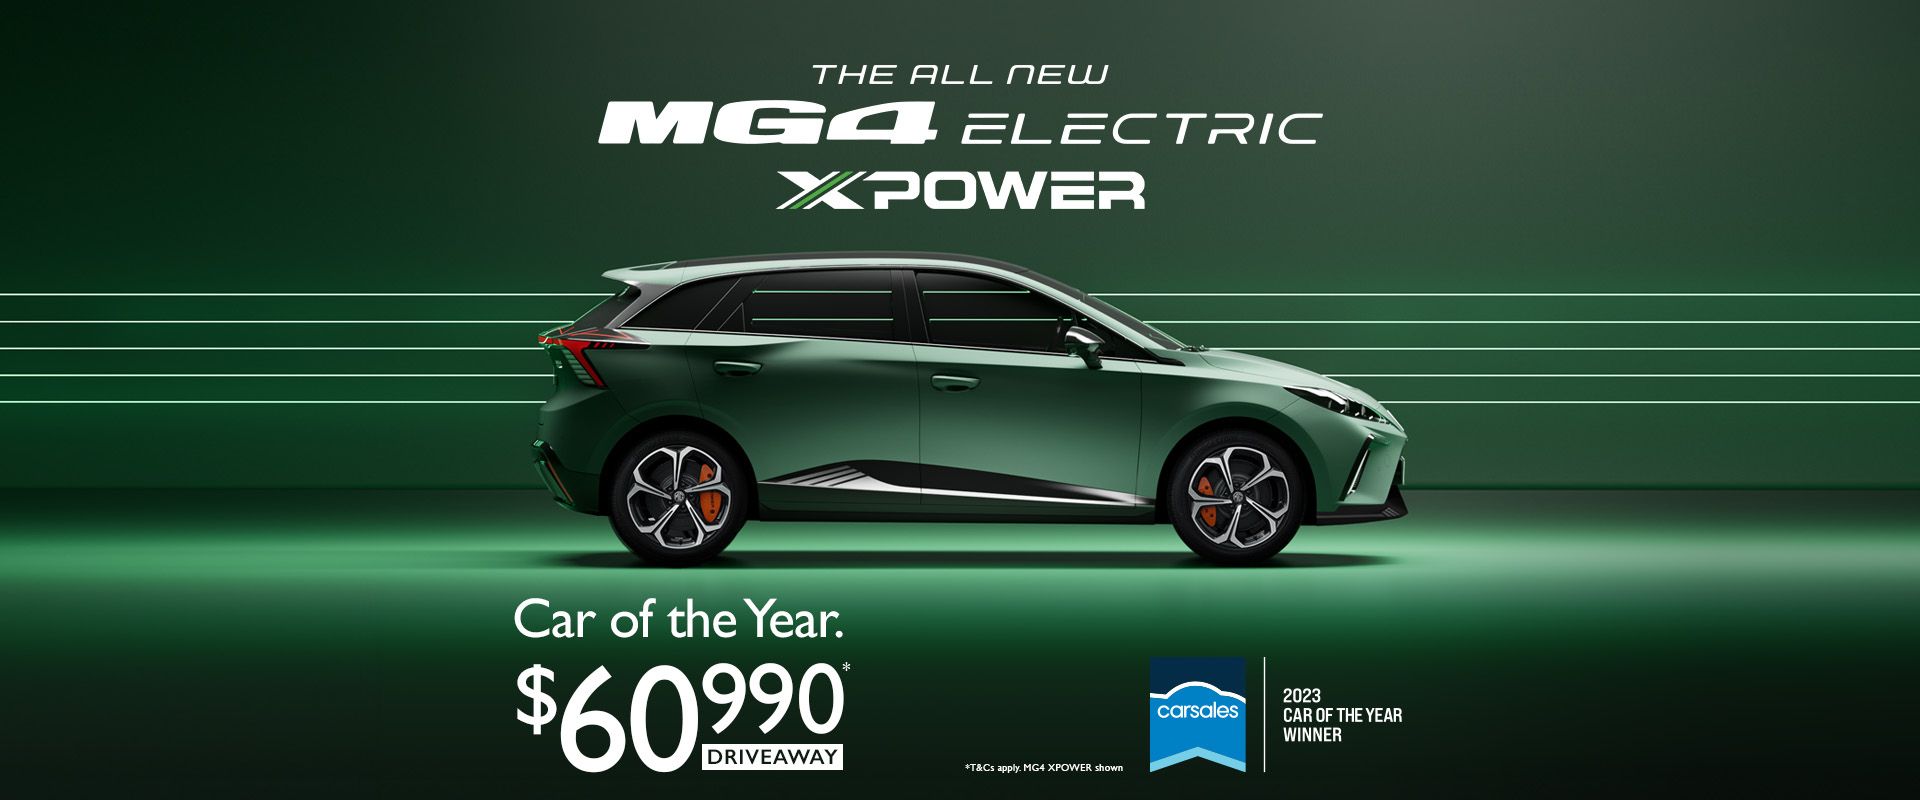 MG4 ELECTRIC XPOWER | Carsales - 2023 Car of the Year Winner